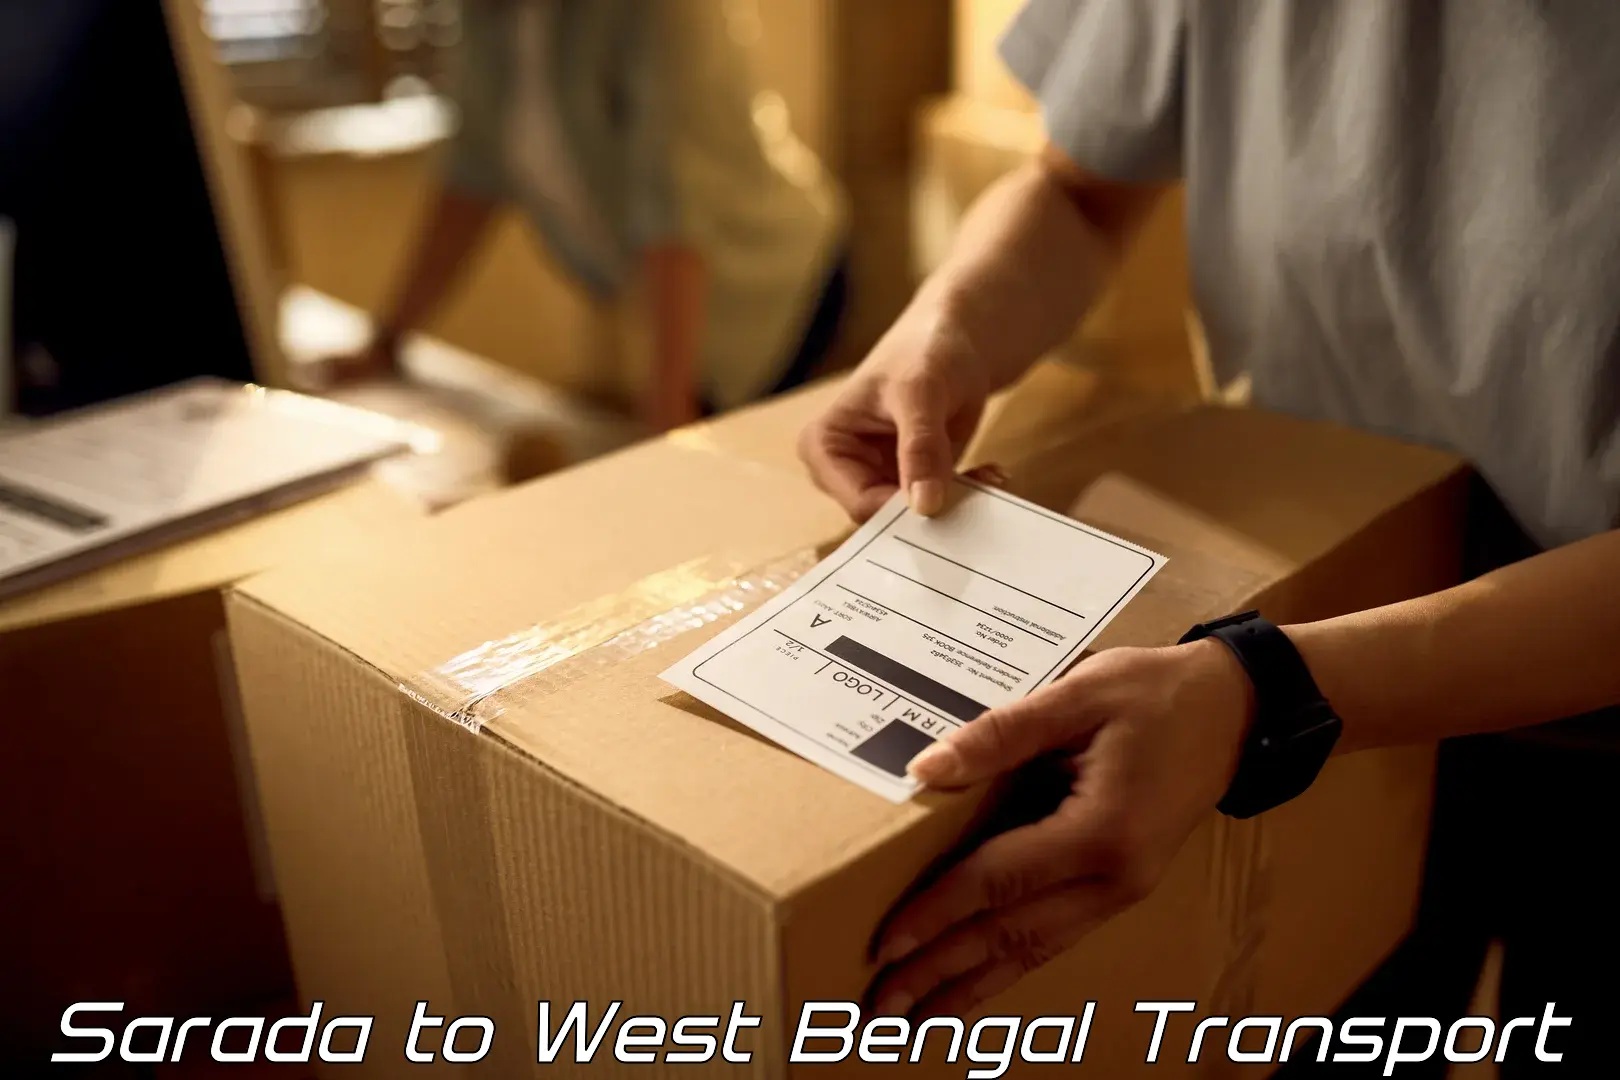 Container transport service Sarada to West Bengal